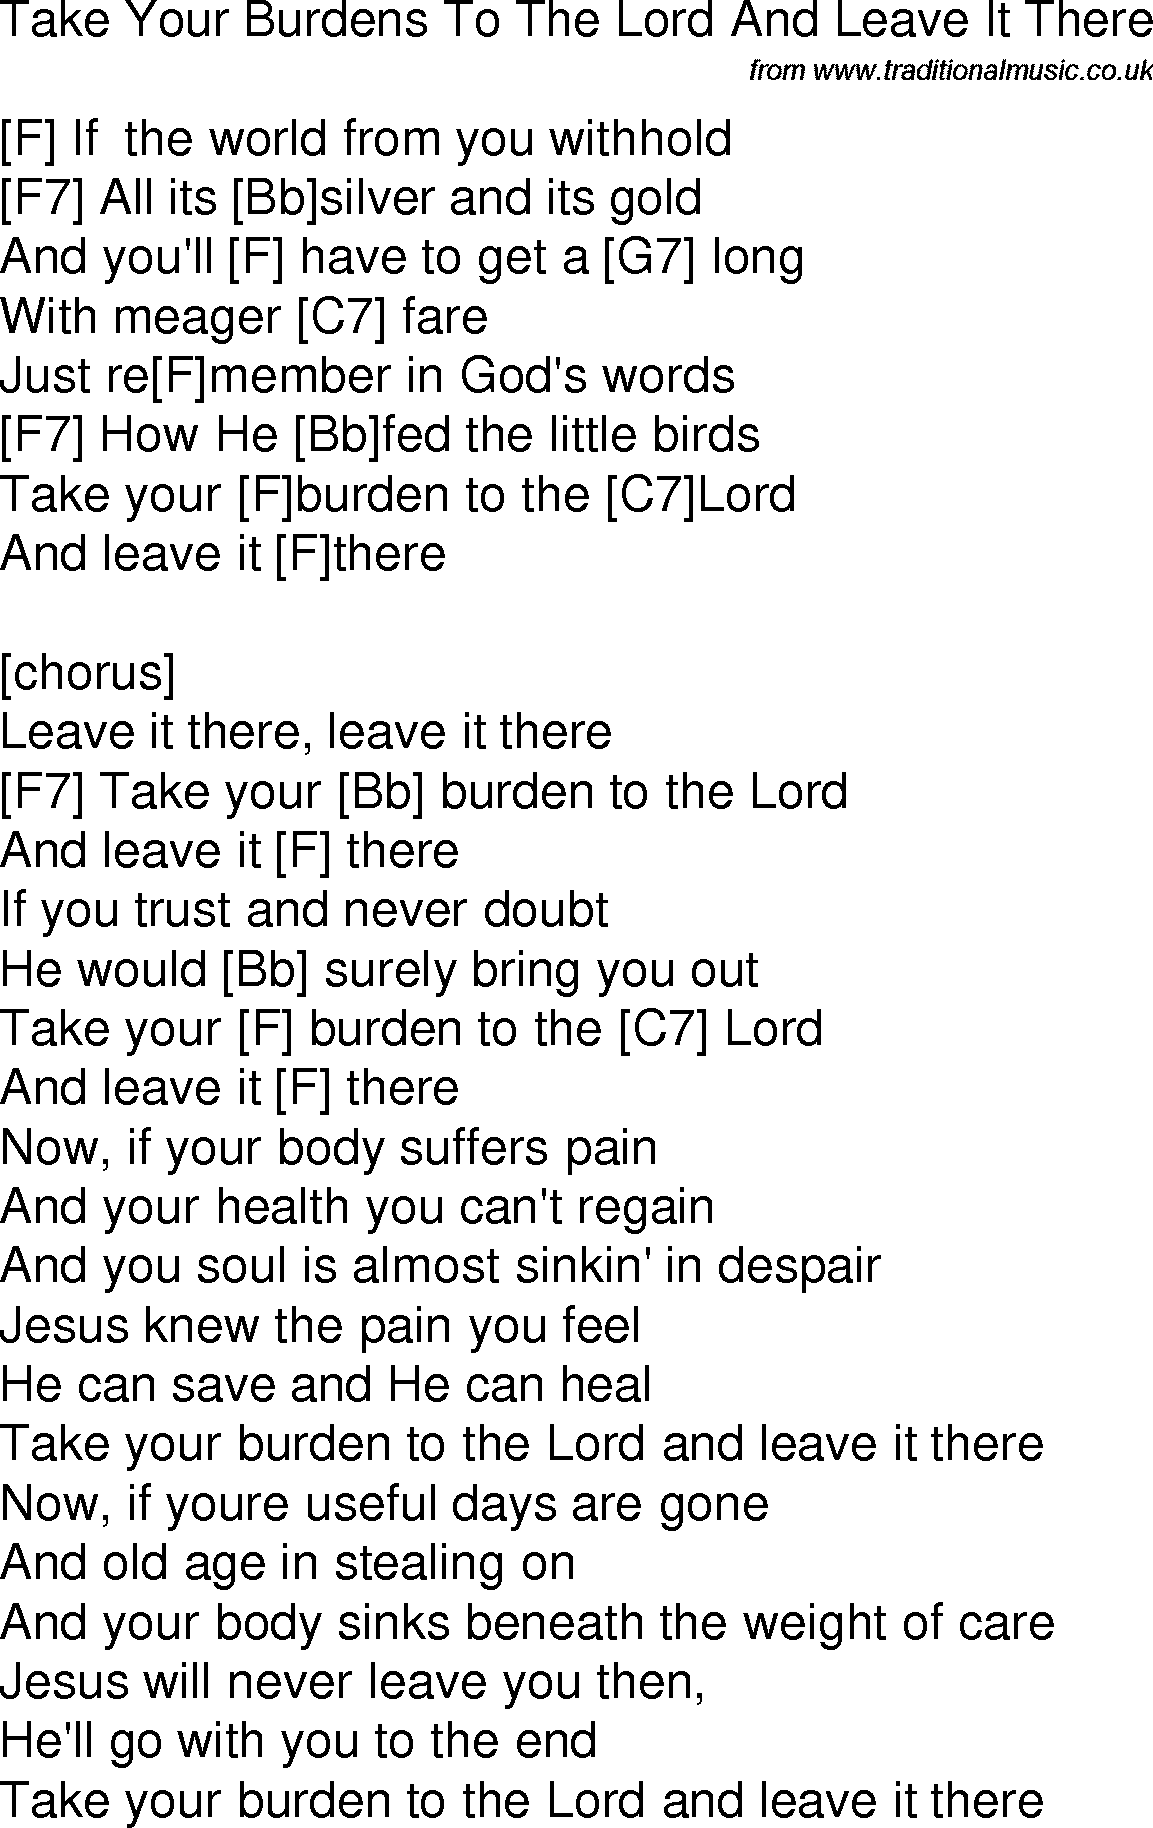 Old time song lyrics with chords for Take Your Burdens To The Lord And Leave It There F